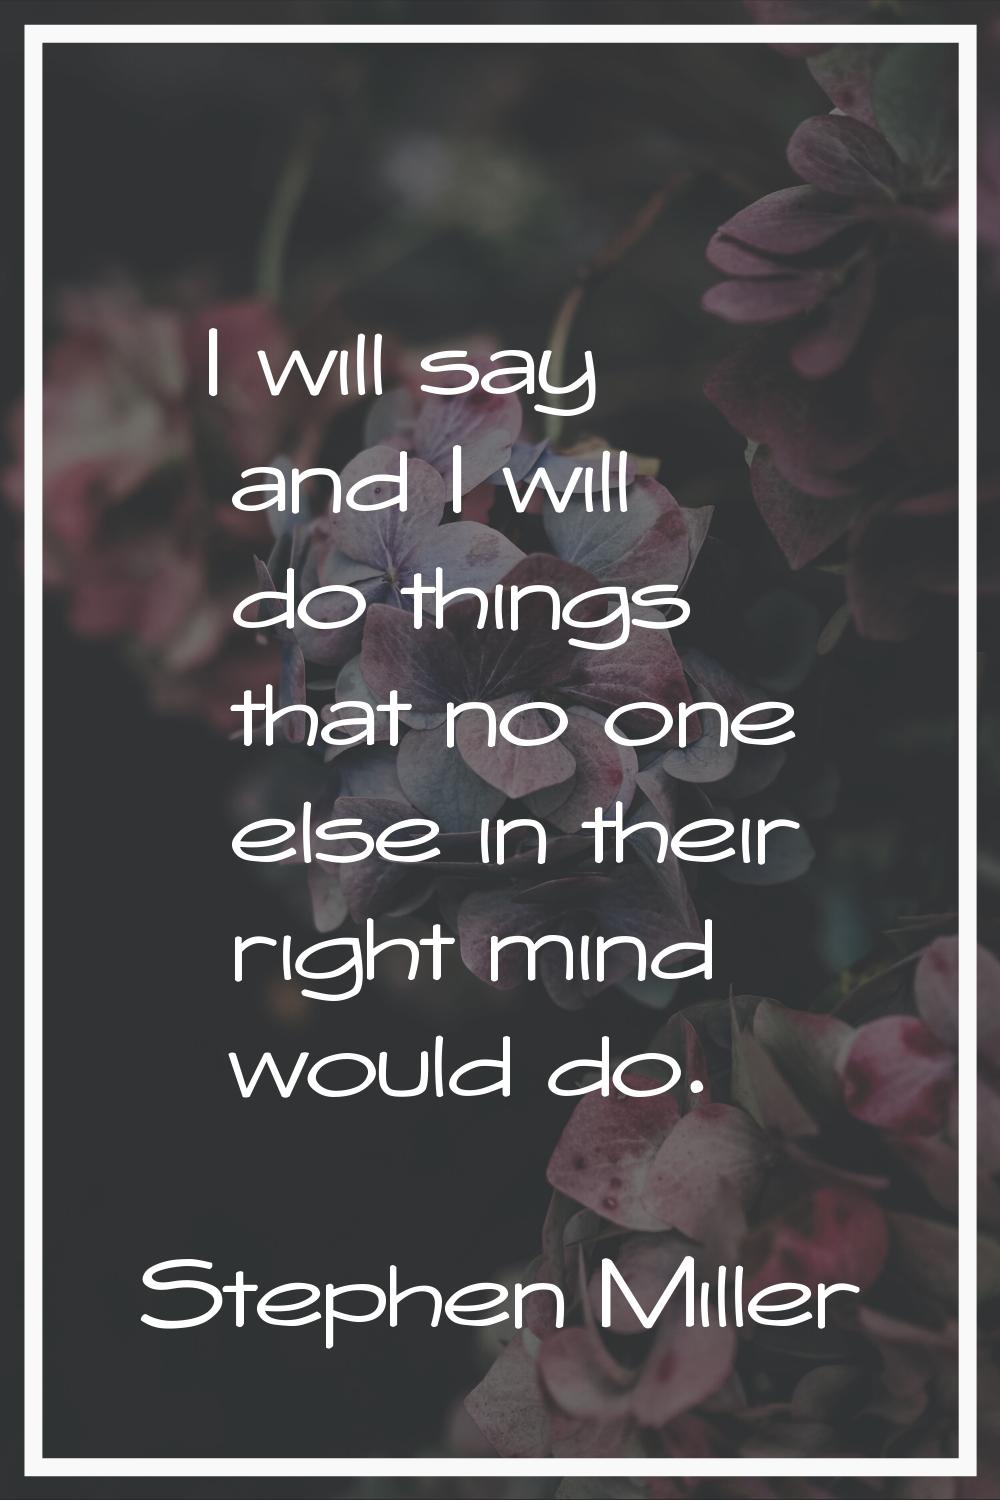 I will say and I will do things that no one else in their right mind would do.